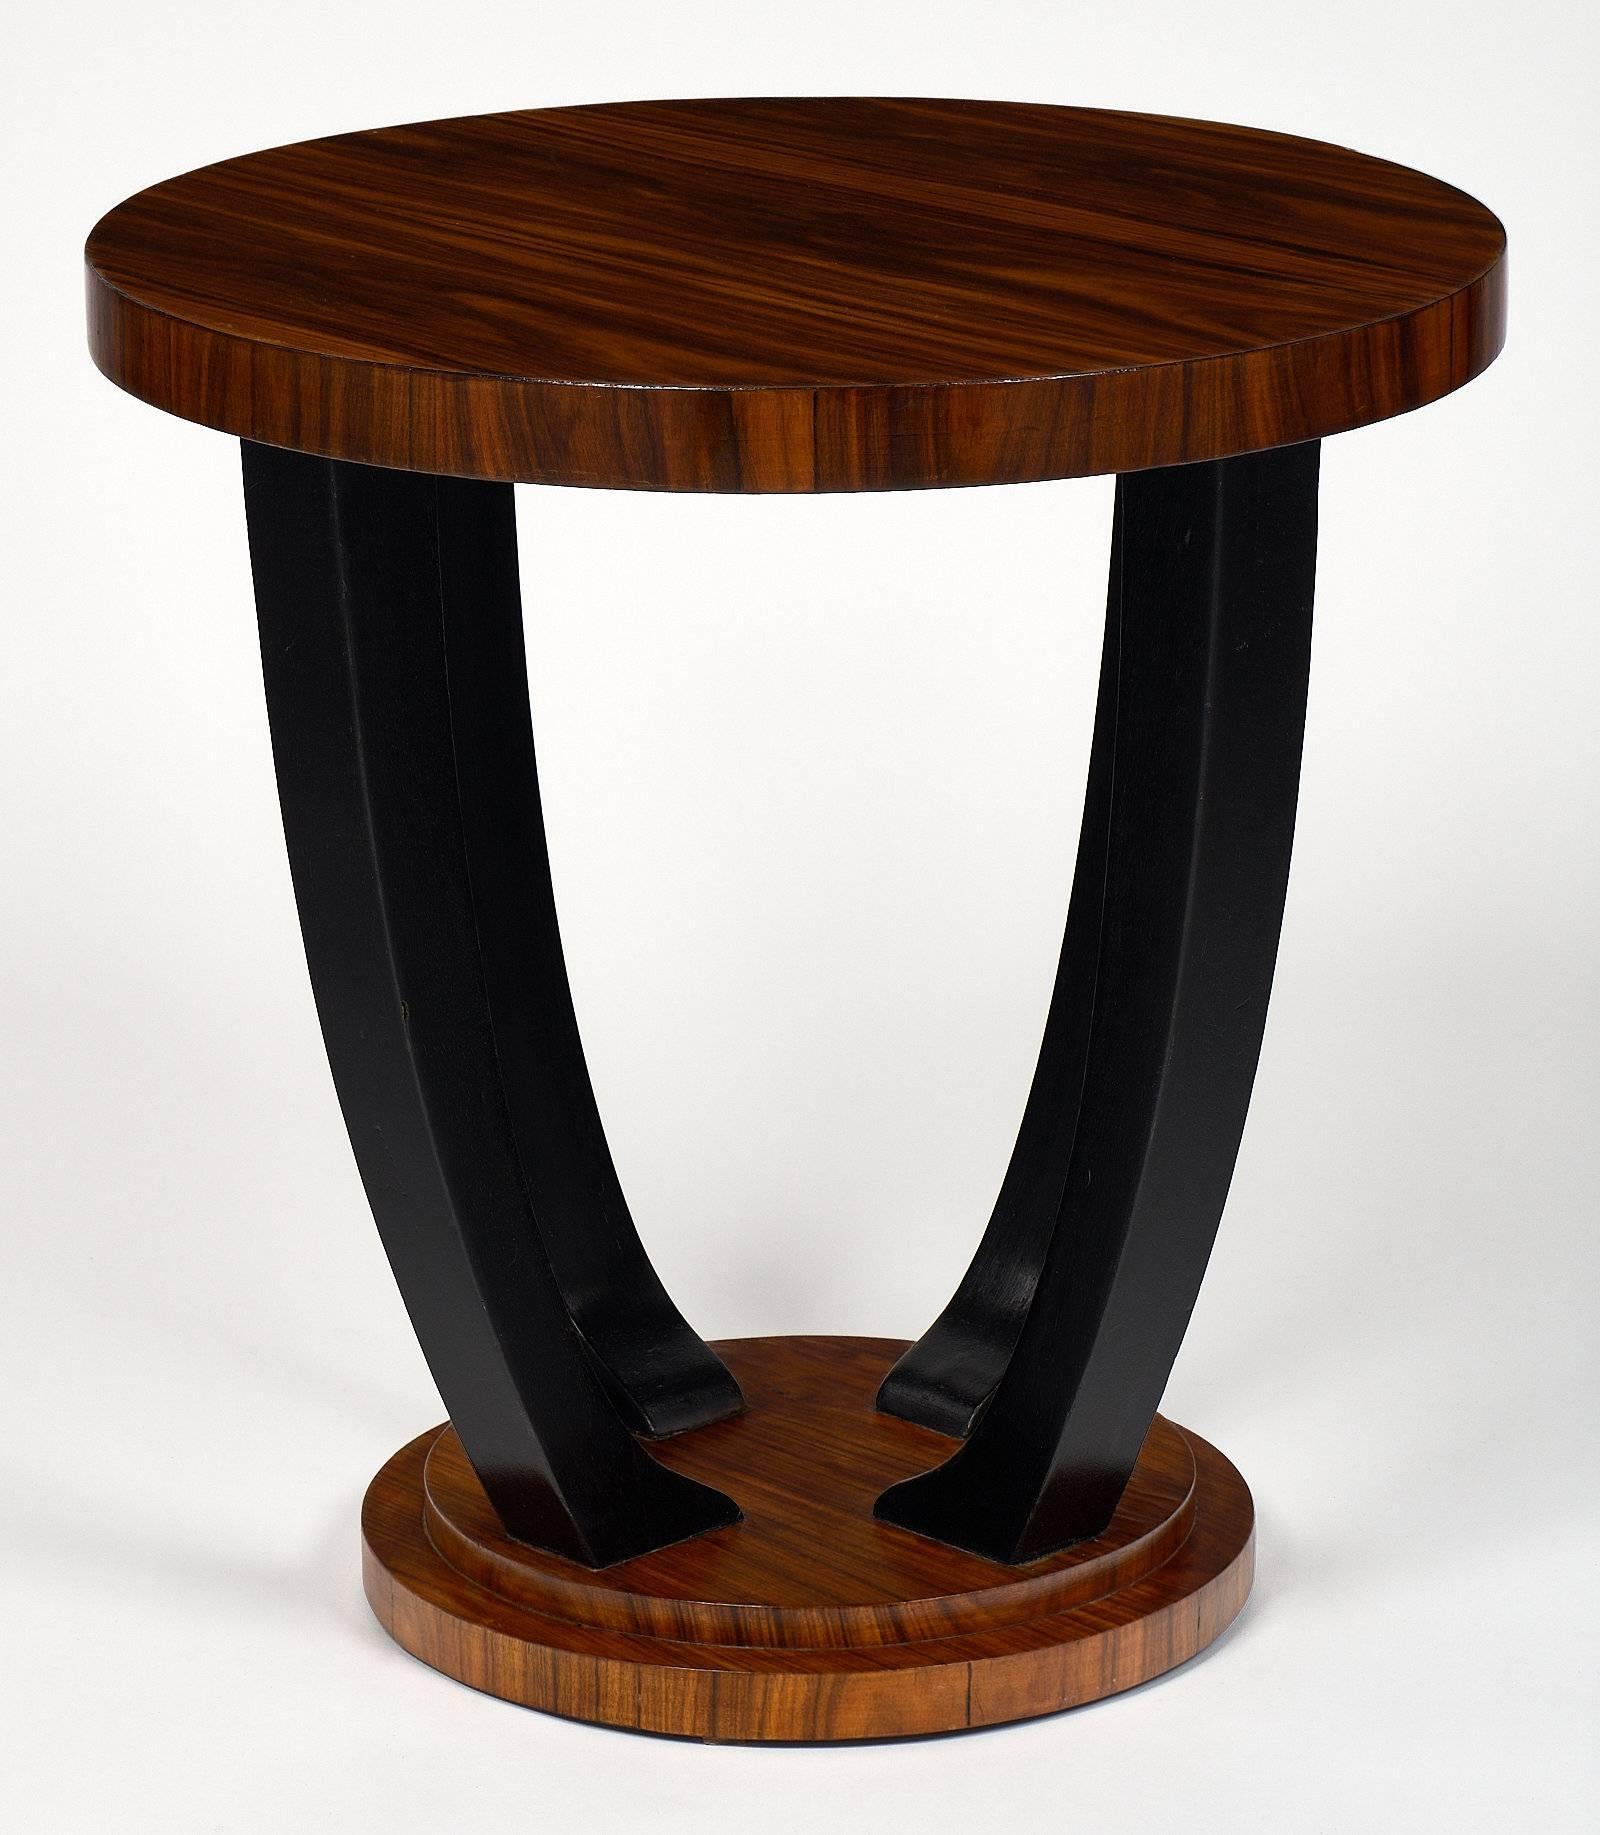 Striking French Art Deco period gueridon side table in rosewood and ebonized wood base with French polish.